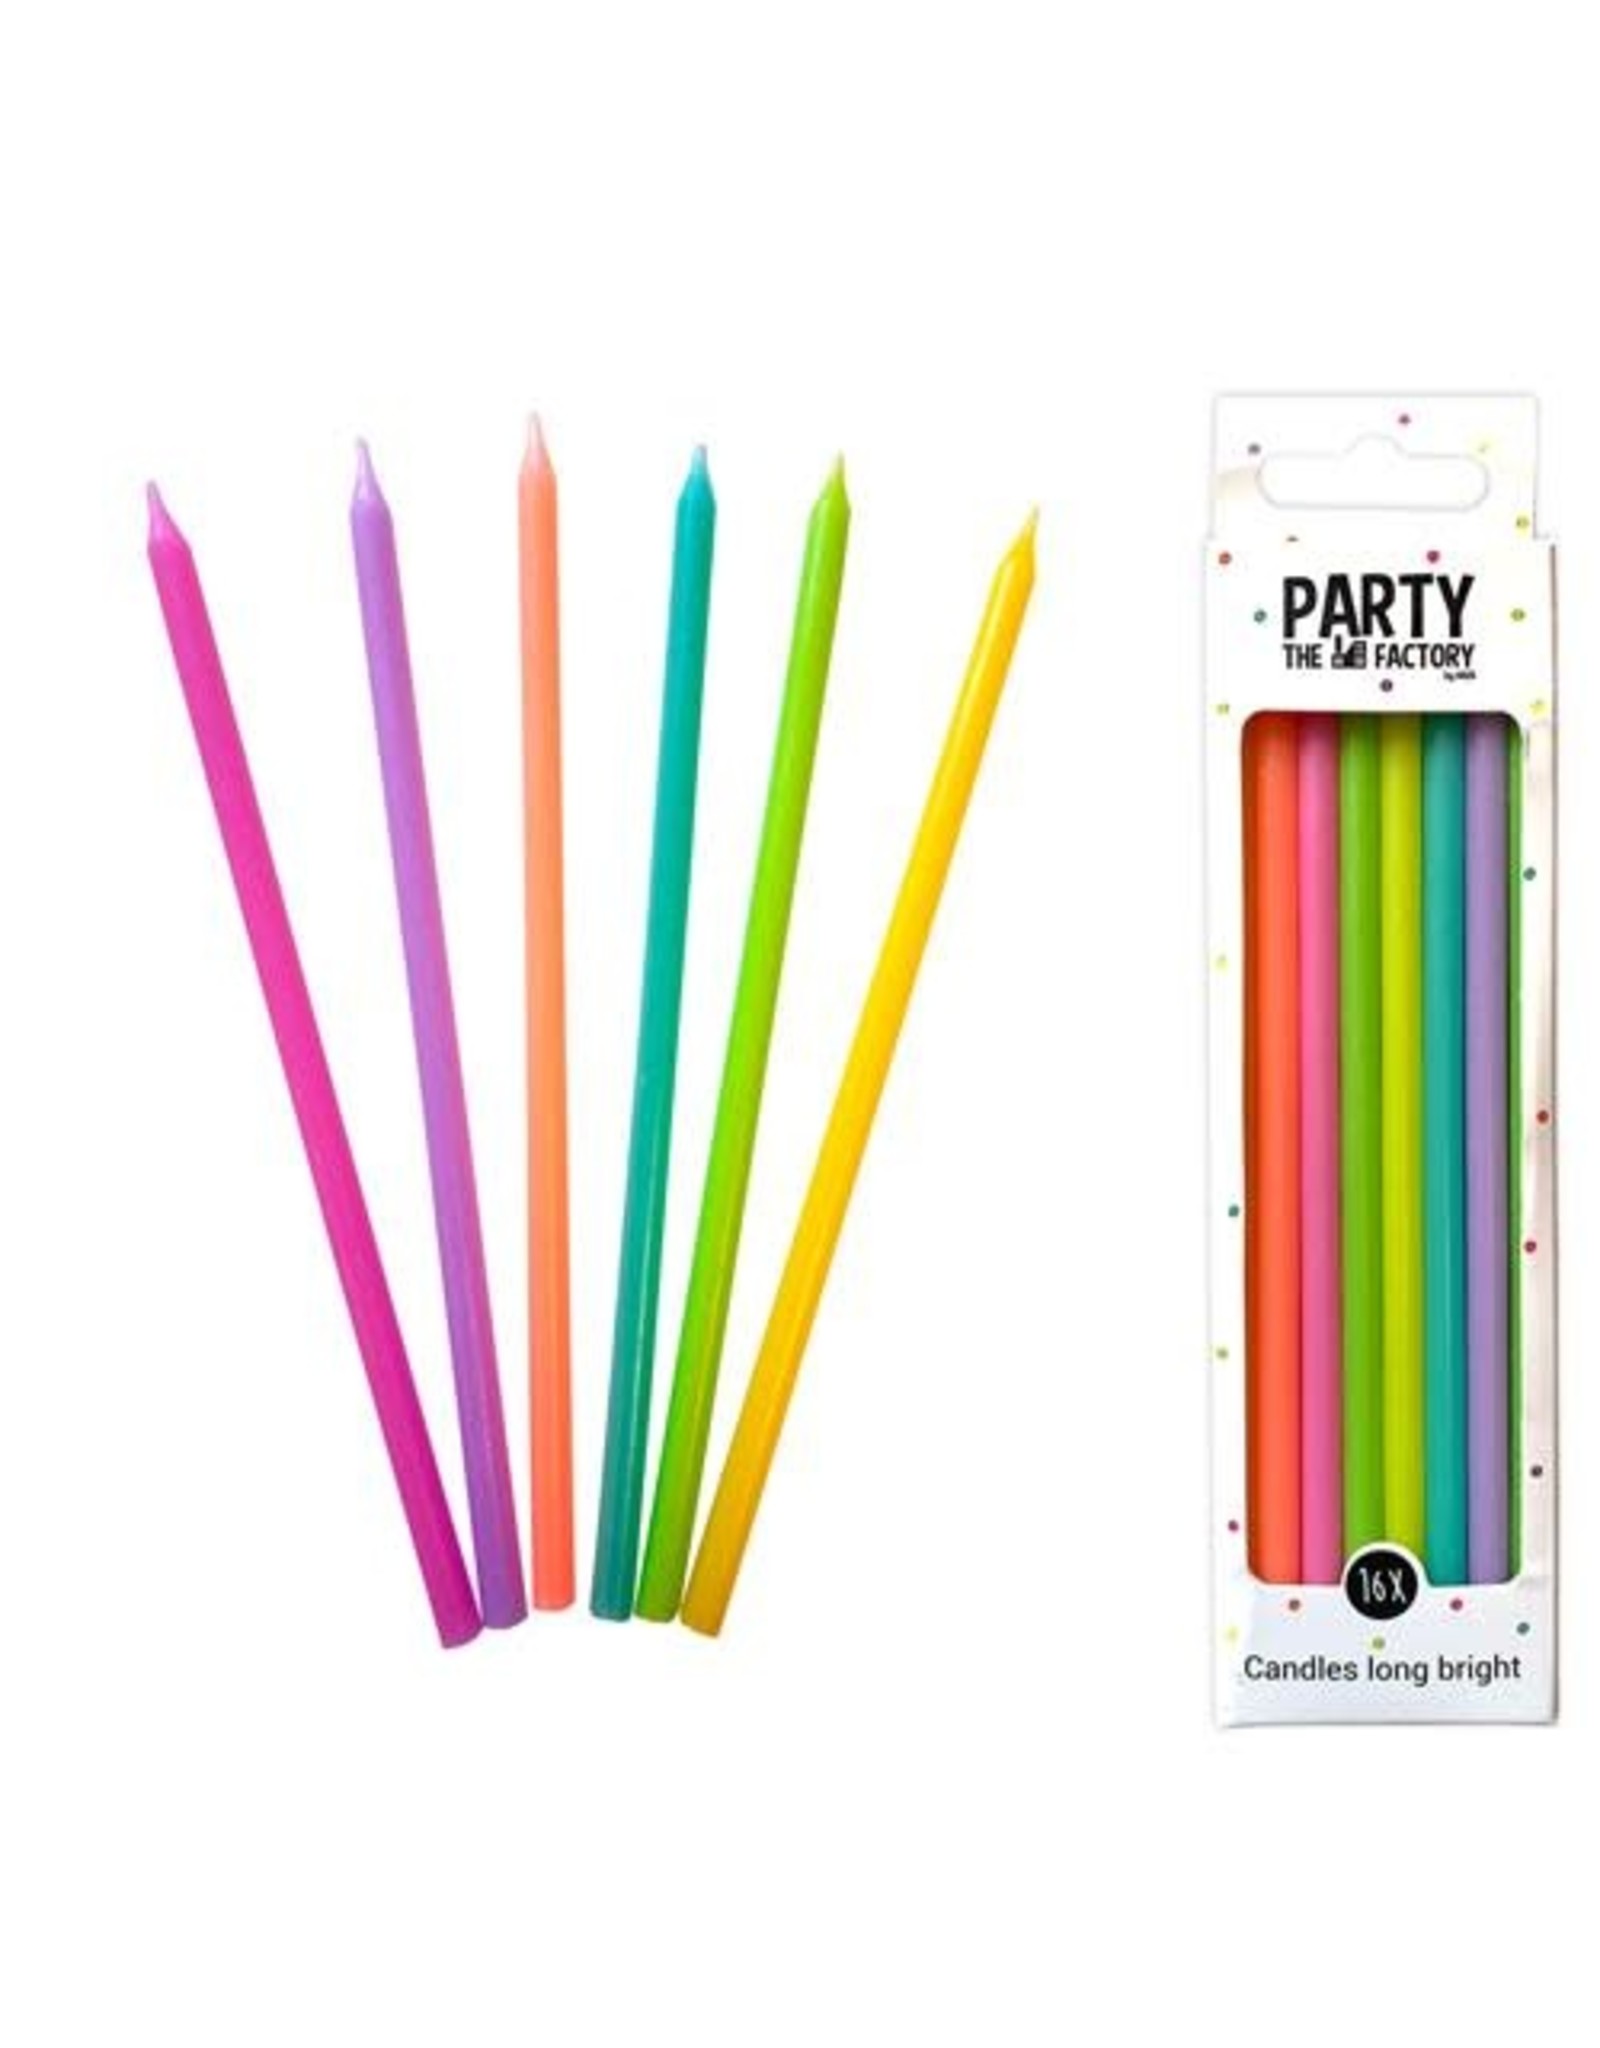 The party factory long bright candles 16 stuks